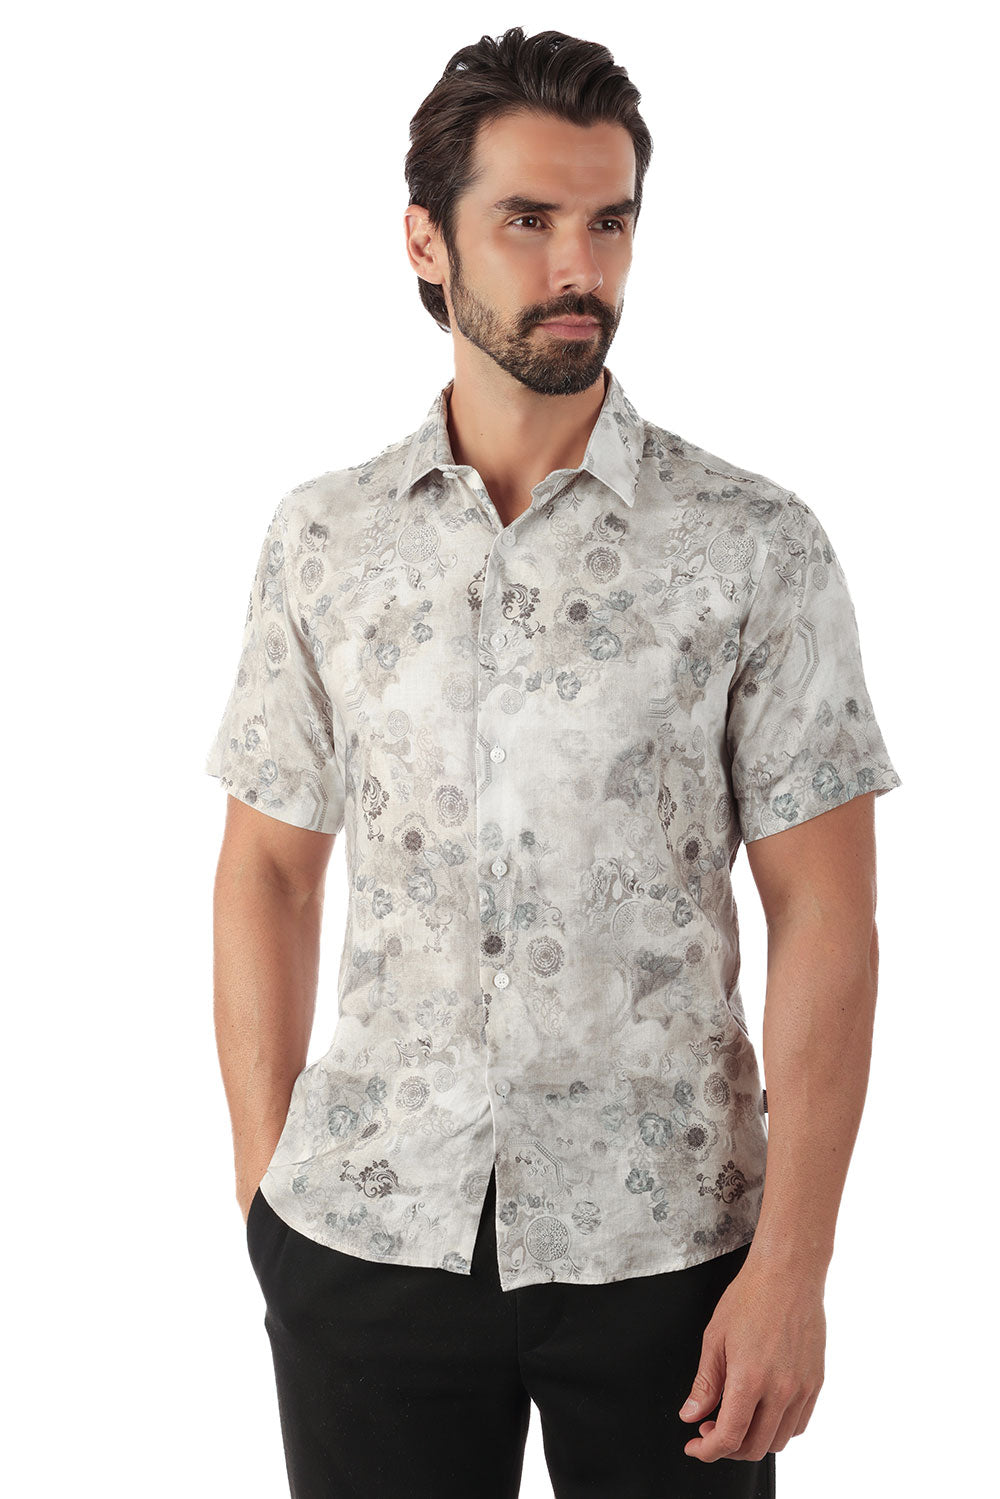 BARABAS Men's Floral Abstract Button Down Short Sleeve Shirts 4SST18 Grey